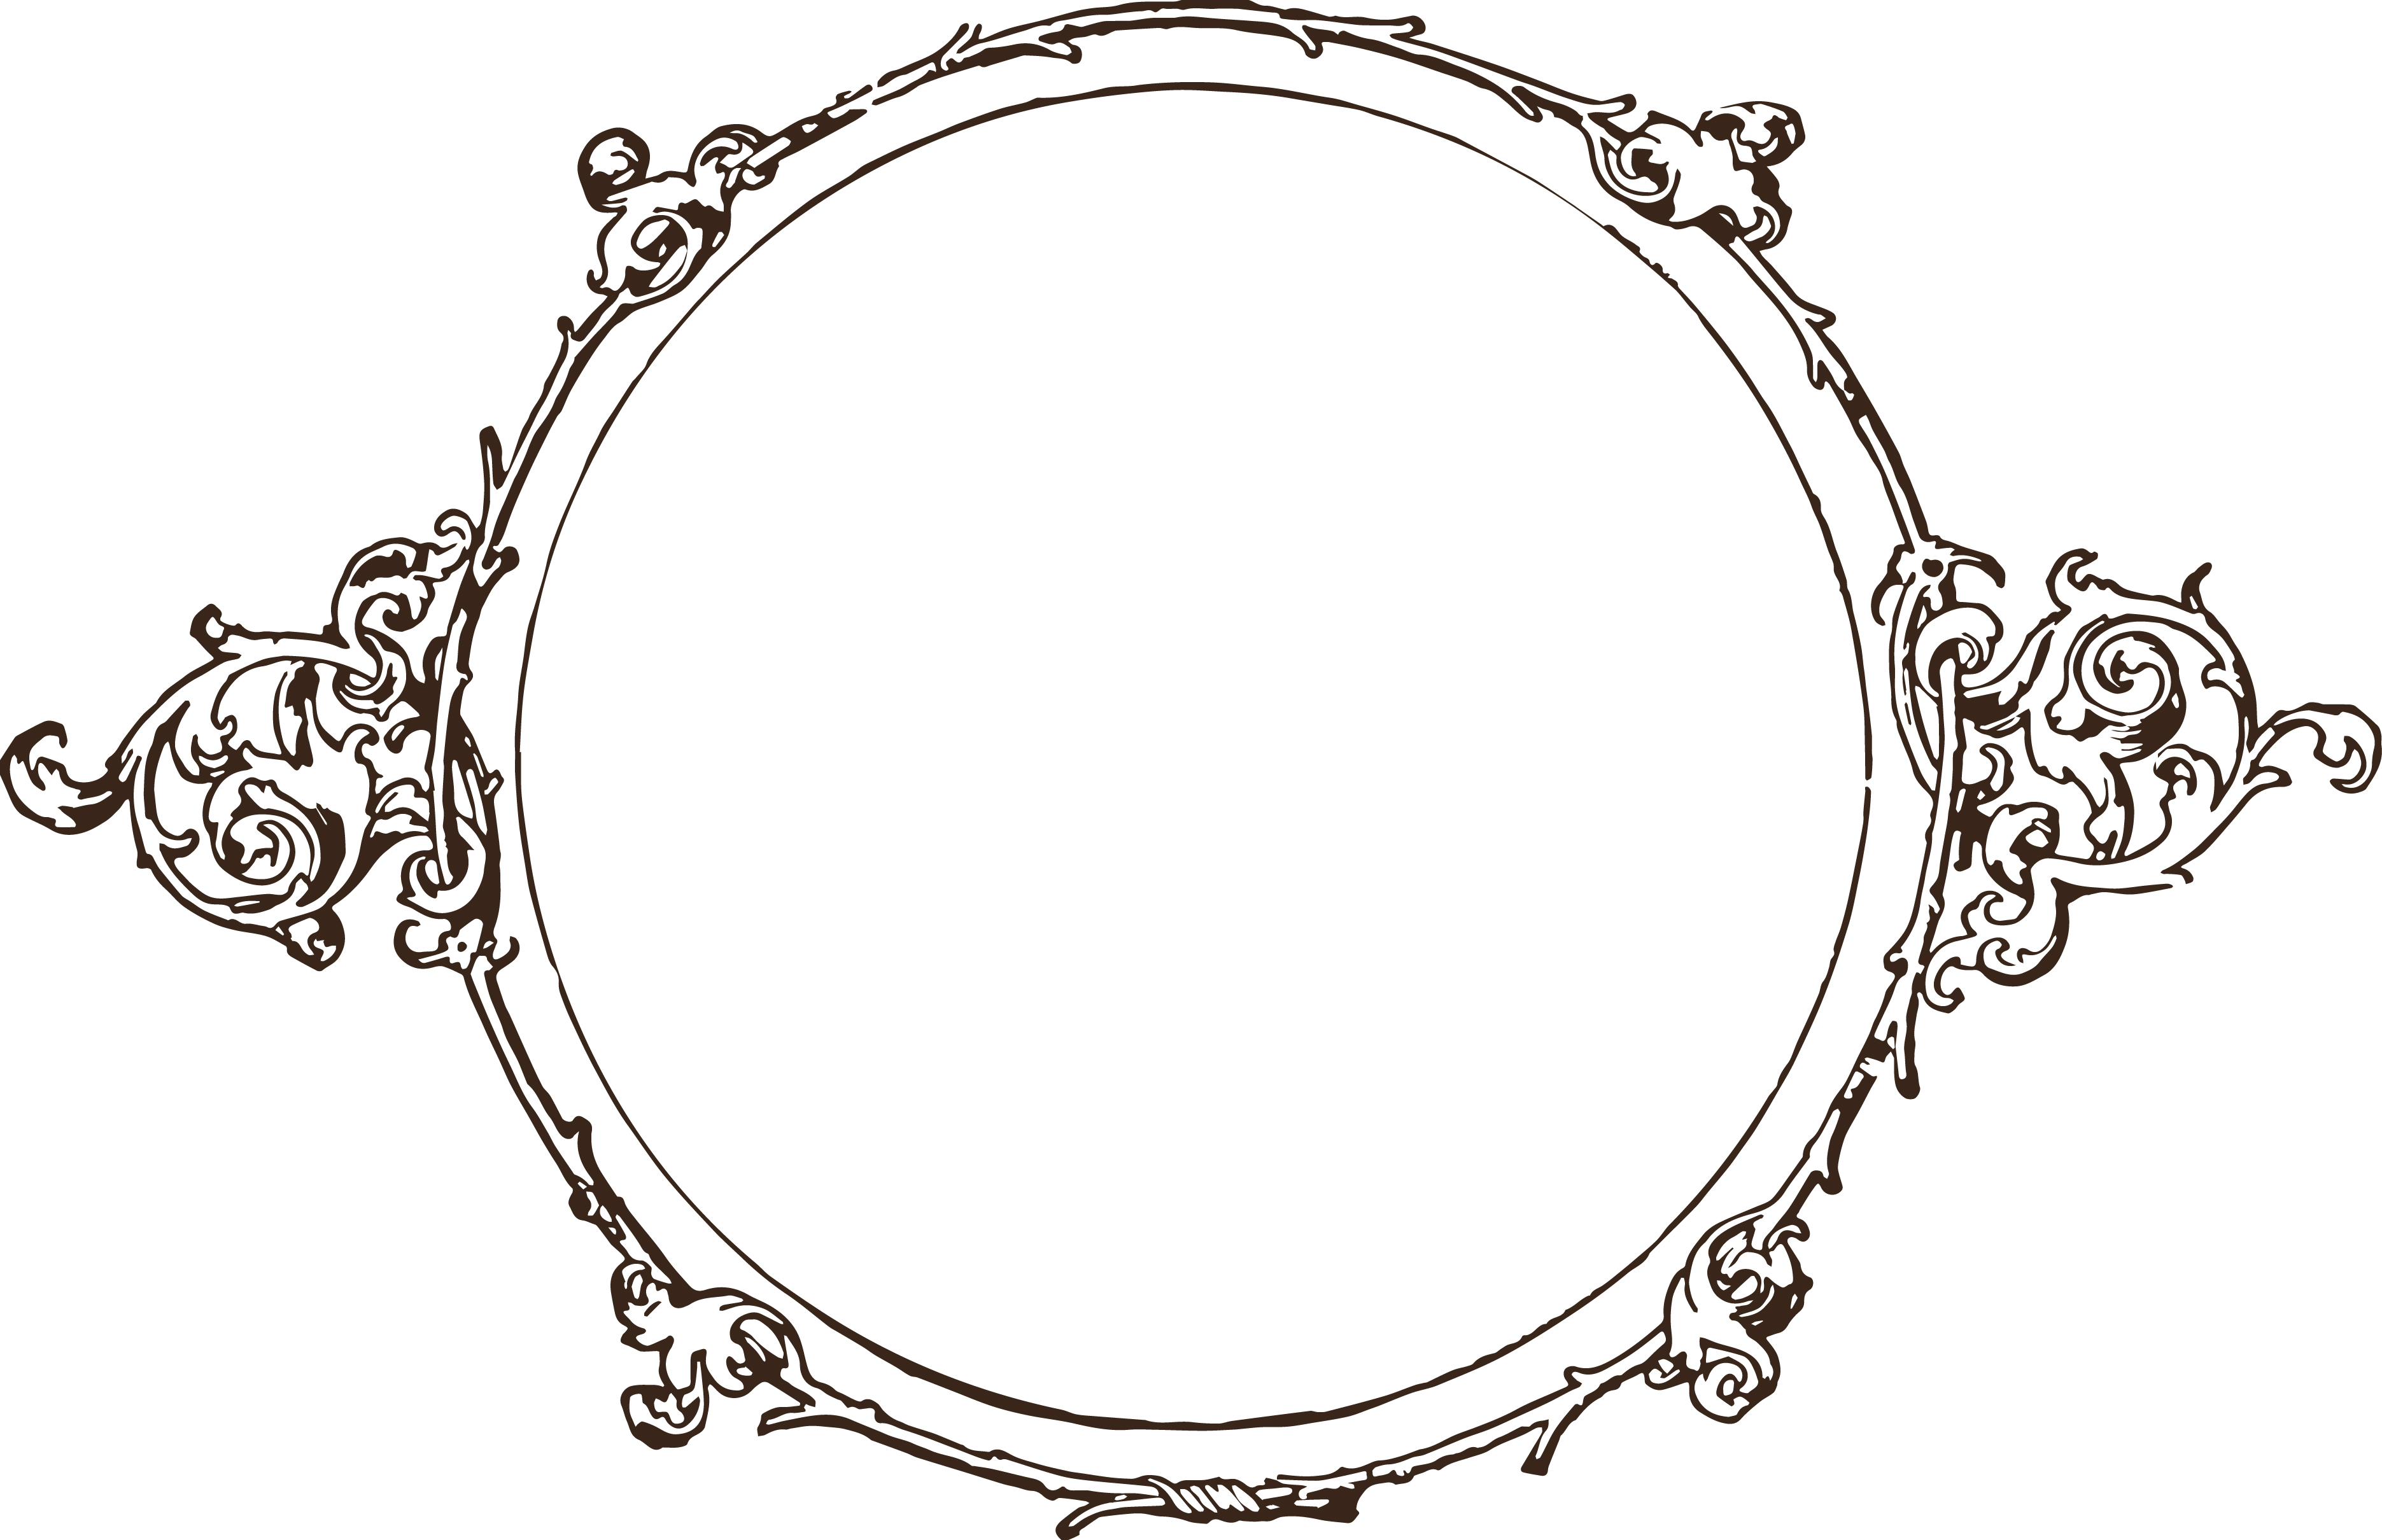 Royalty Free Image - Vintage Scroll Frame | Oh So Nifty Vintage 